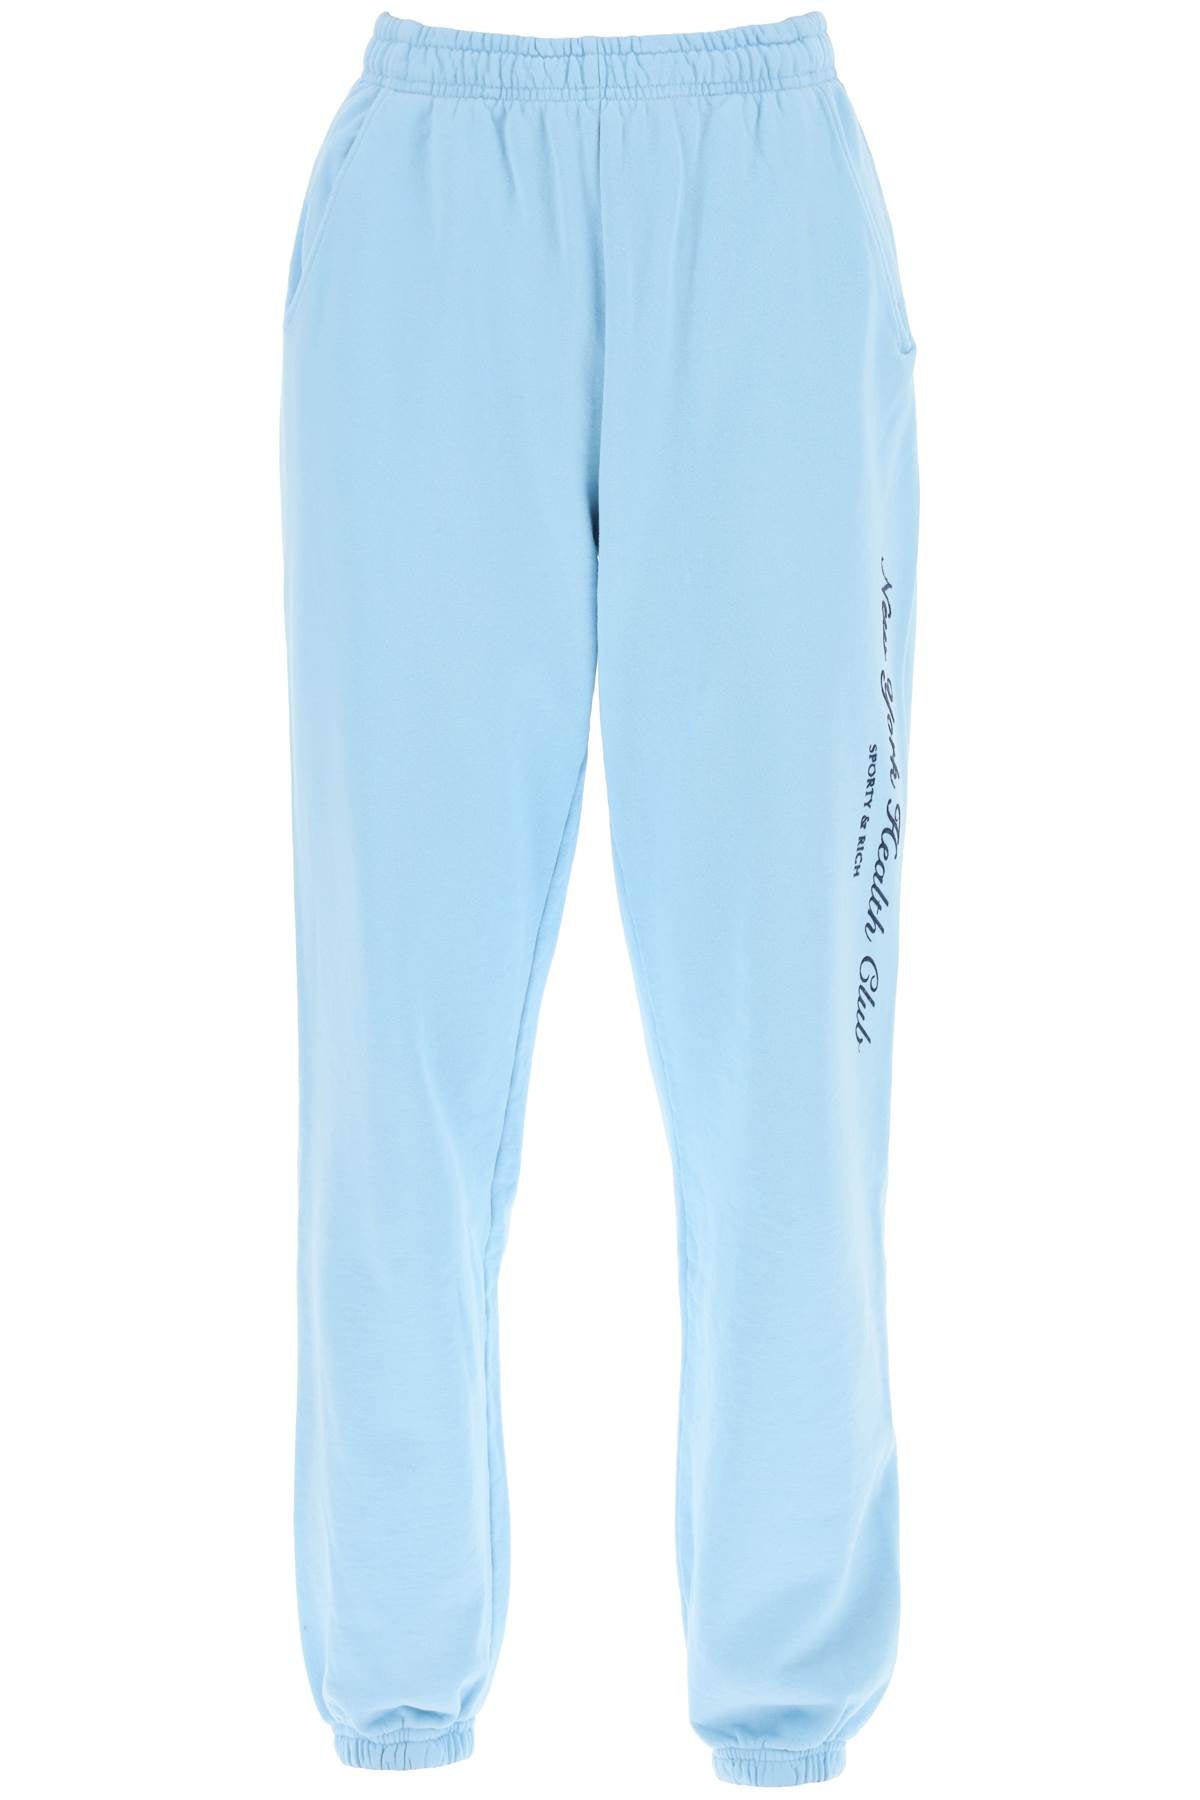 SPORTY AND RICH 'NY HEALTH CLUB' FLOCKED SWEATtrousers